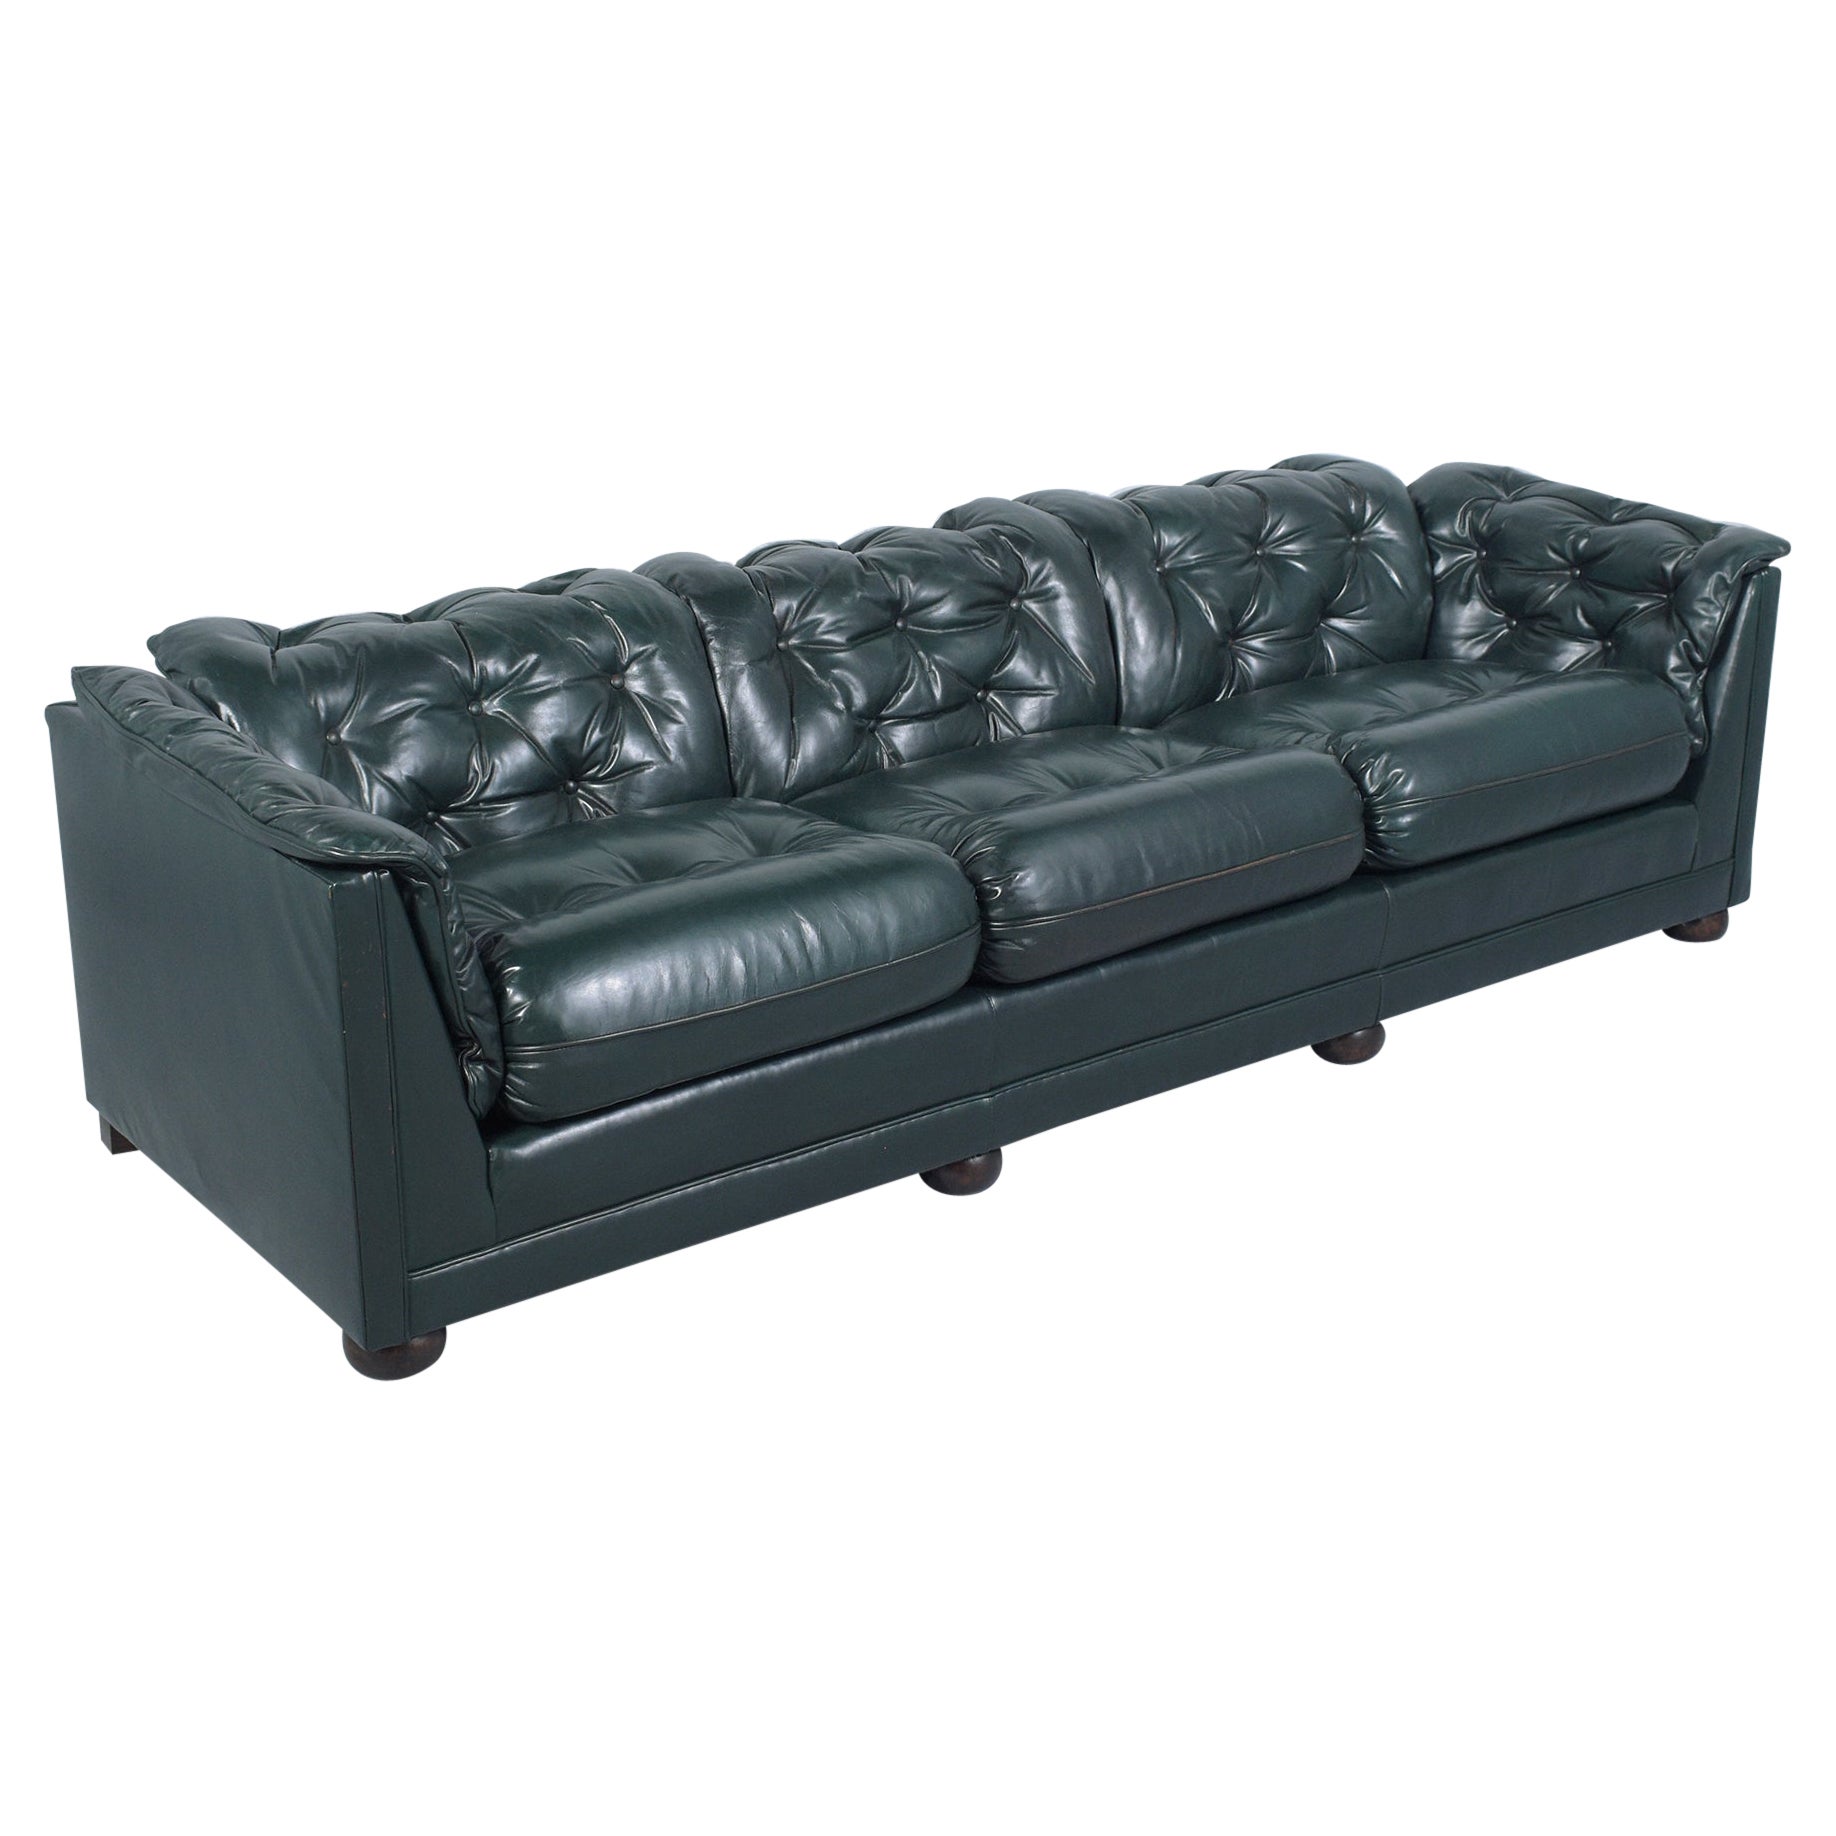 1960s Vintage Emerald Green Tufted Chesterfield Leather Sofa